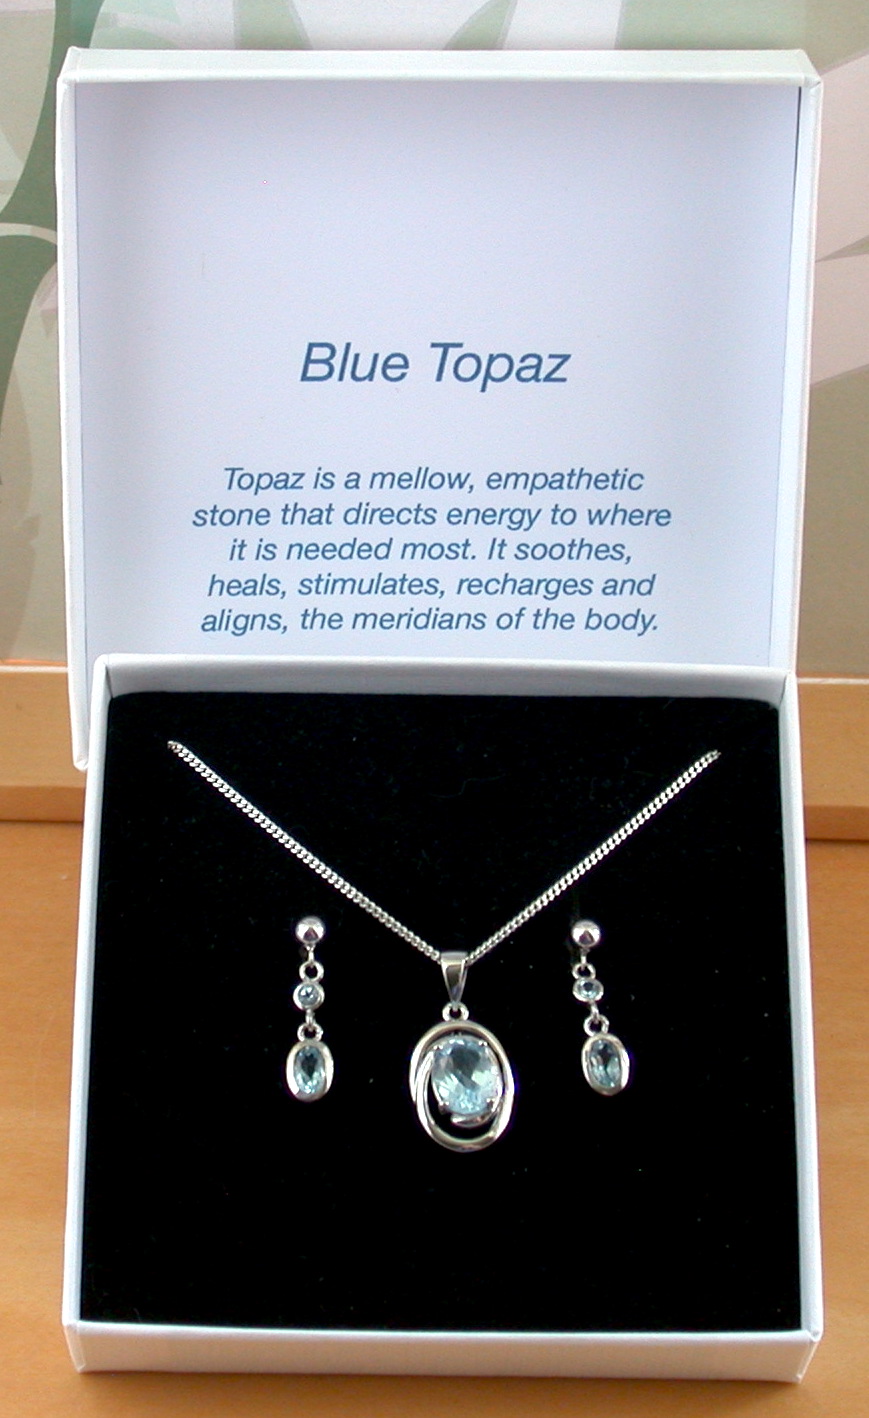 blue topaz necklace and earrings uk